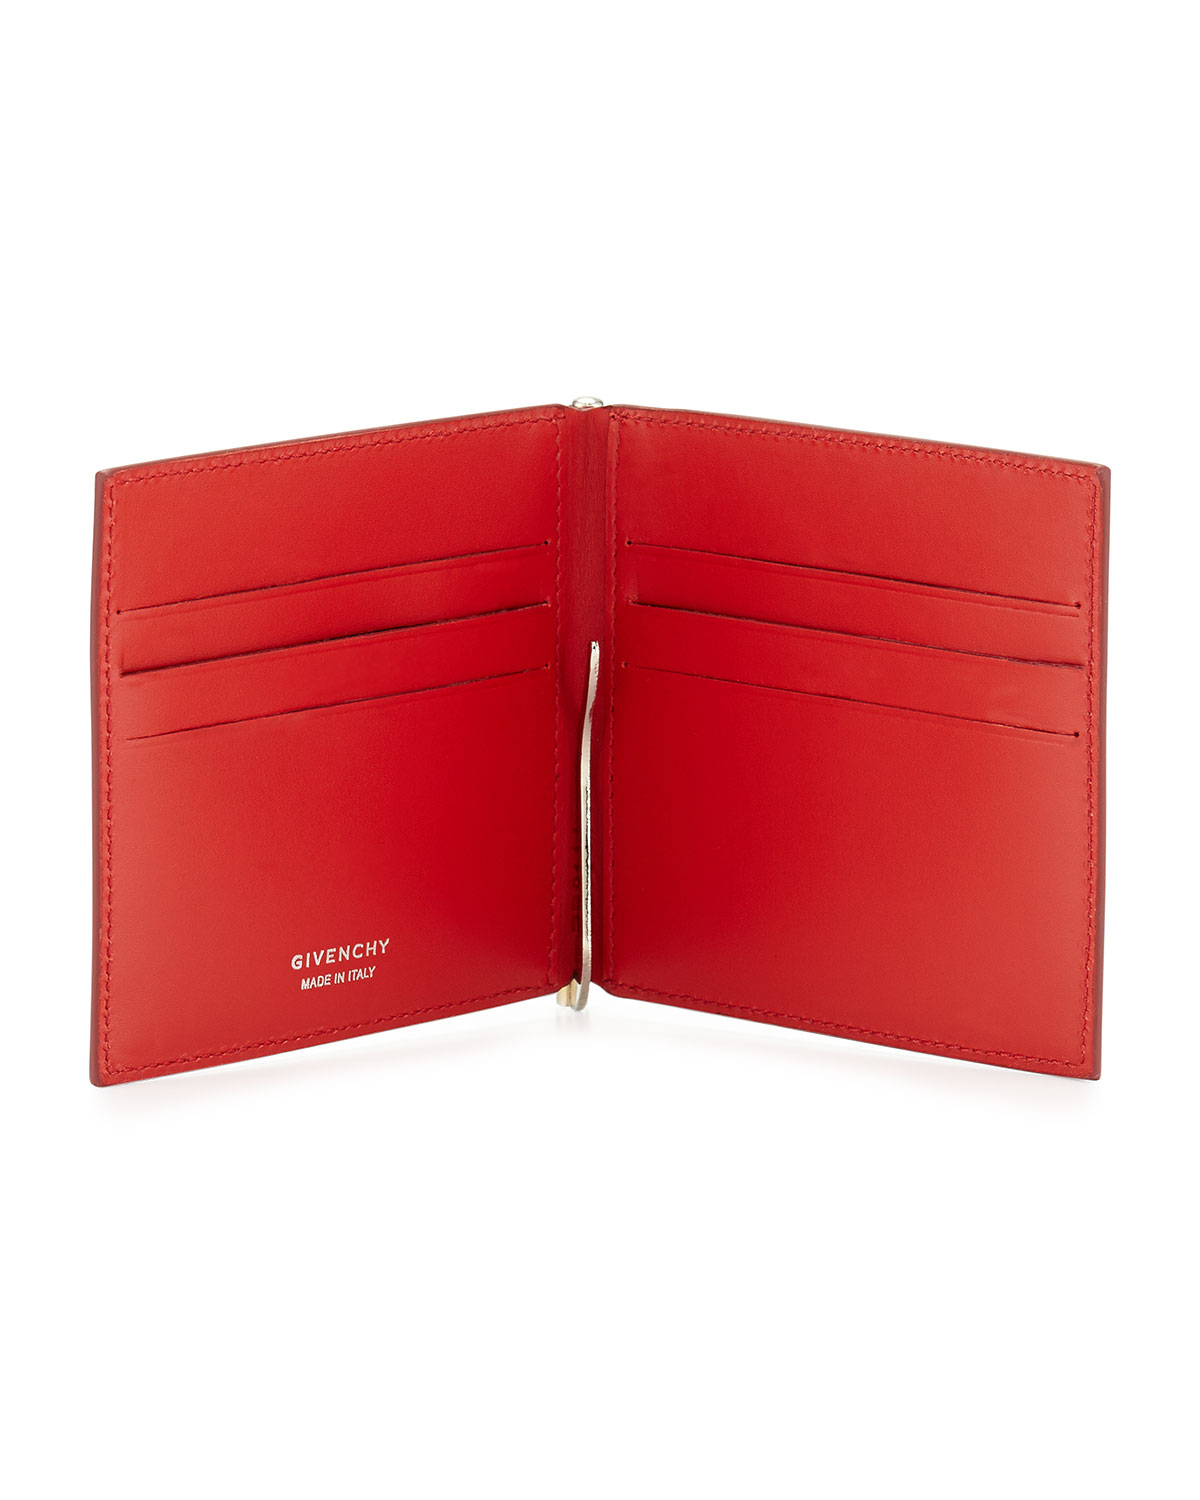 Givenchy Money Clip Leather Billfold Wallet in Red for Men | Lyst